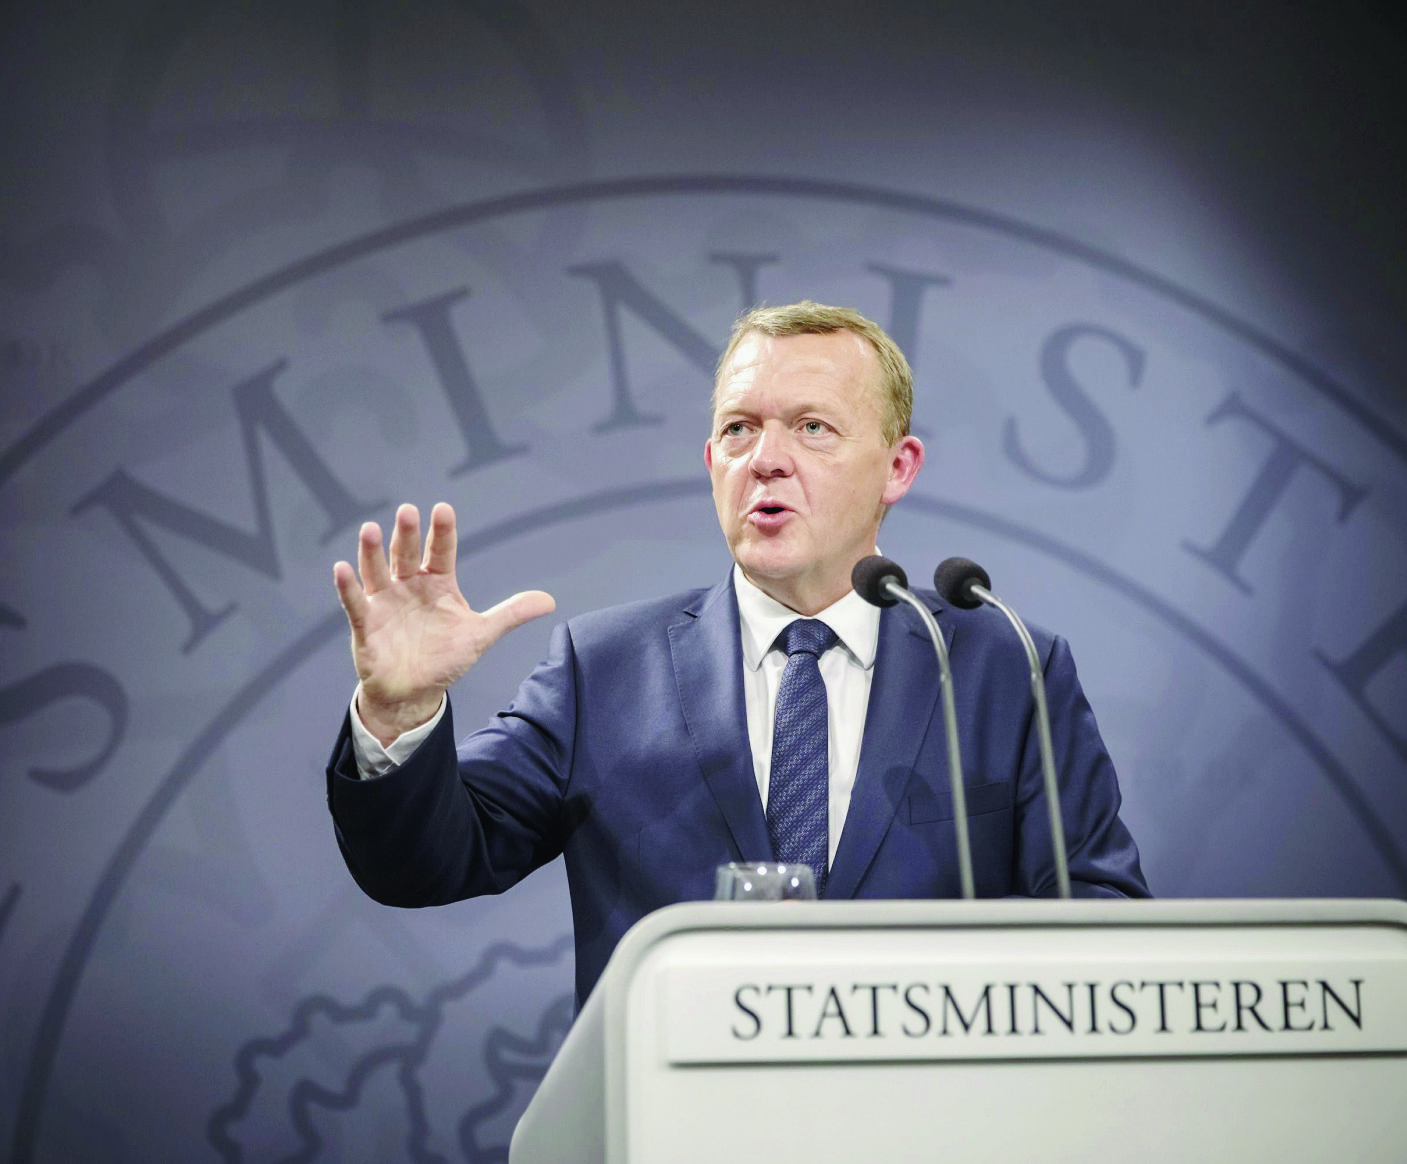 Danish Prime Minister Lars Loekke Rasmussen speaks during a news conference to present his minority government in Copenhagen, Sunday, June 28, 2015. Rasmussen presented his new government, whose survival relies on the populist, anti-immigrant Danish People's Party, which came second in the June 18 elections, and two other parties. (Sanne Vils Axelsen/Polfoto via AP)  DENMARK OUT DAENEMARK WAHLEN PARLAMENT